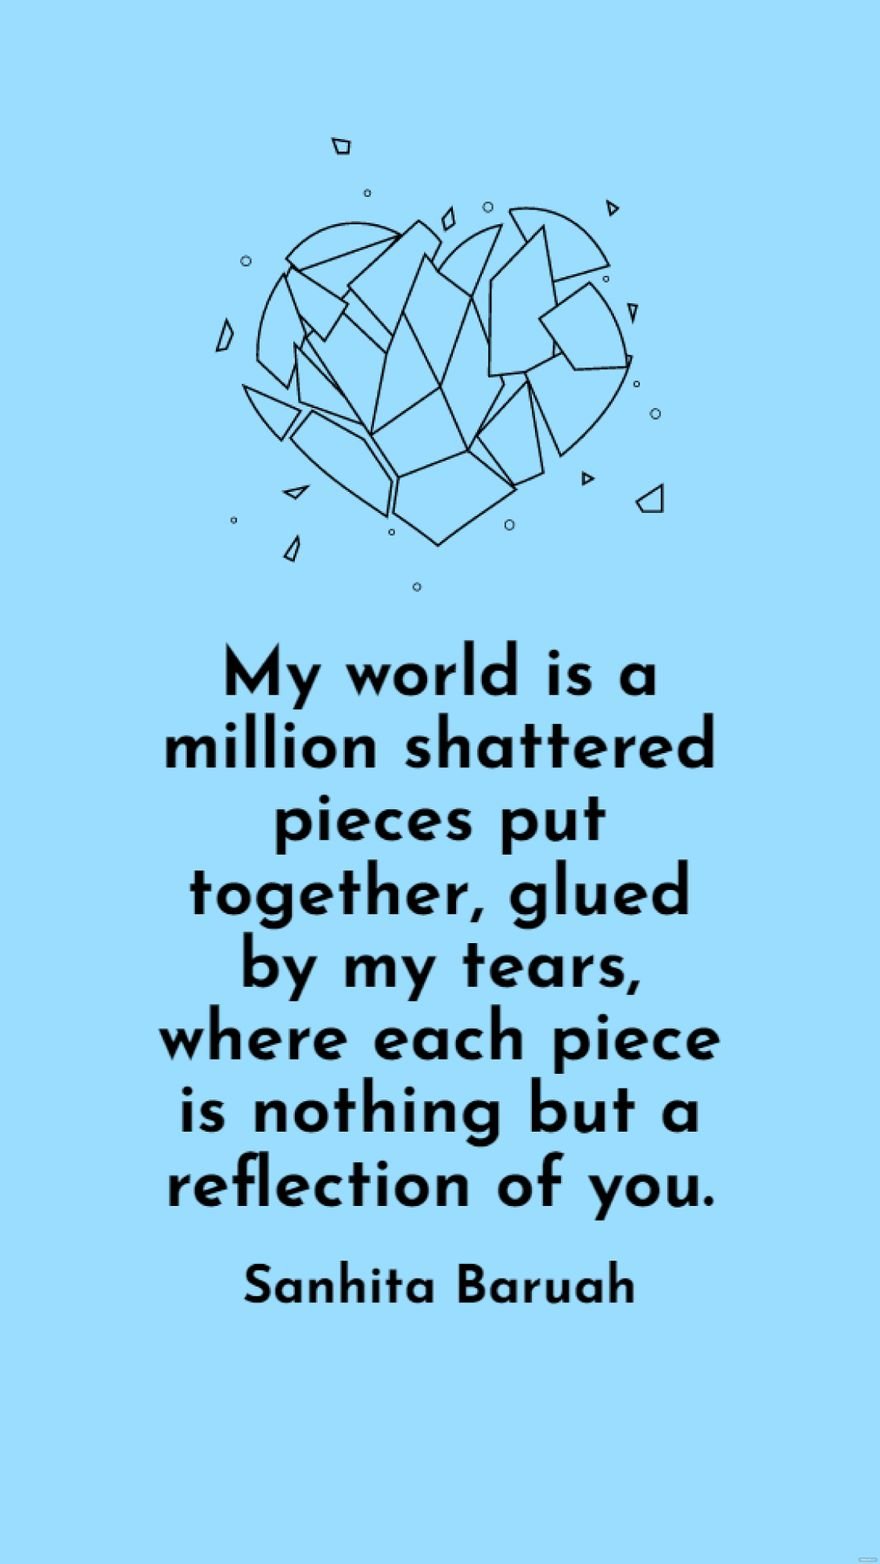 Sanhita Baruah - My world is a million shattered pieces put together, glued by my tears, where each piece is nothing but a reflection of you.